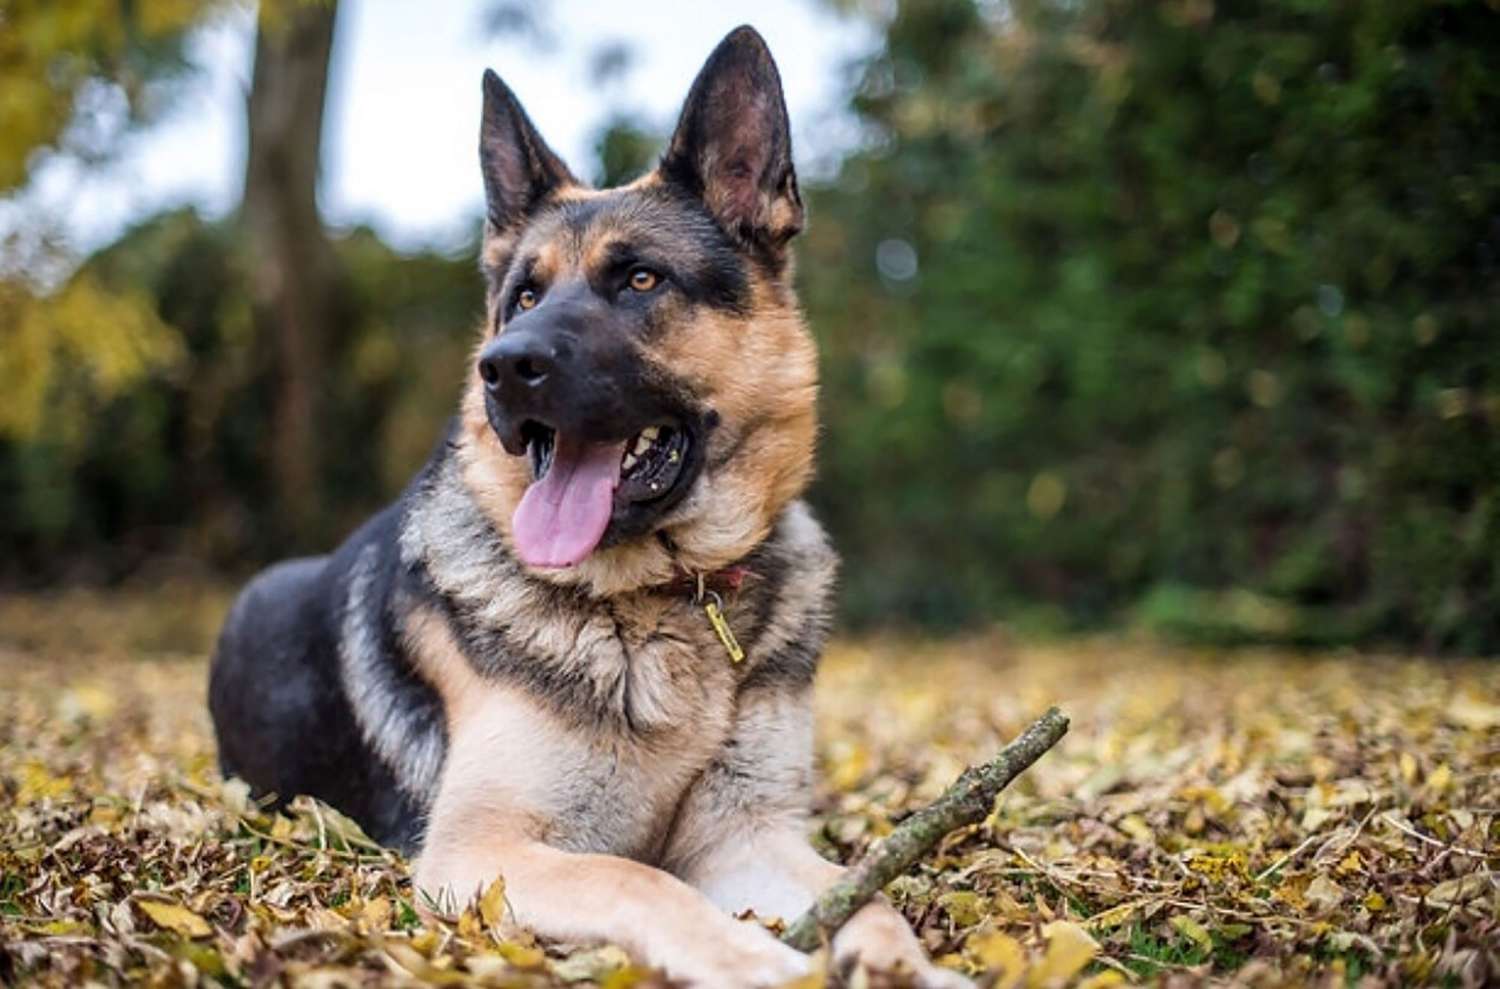 German Shepherd lying in the leaves holding a stick